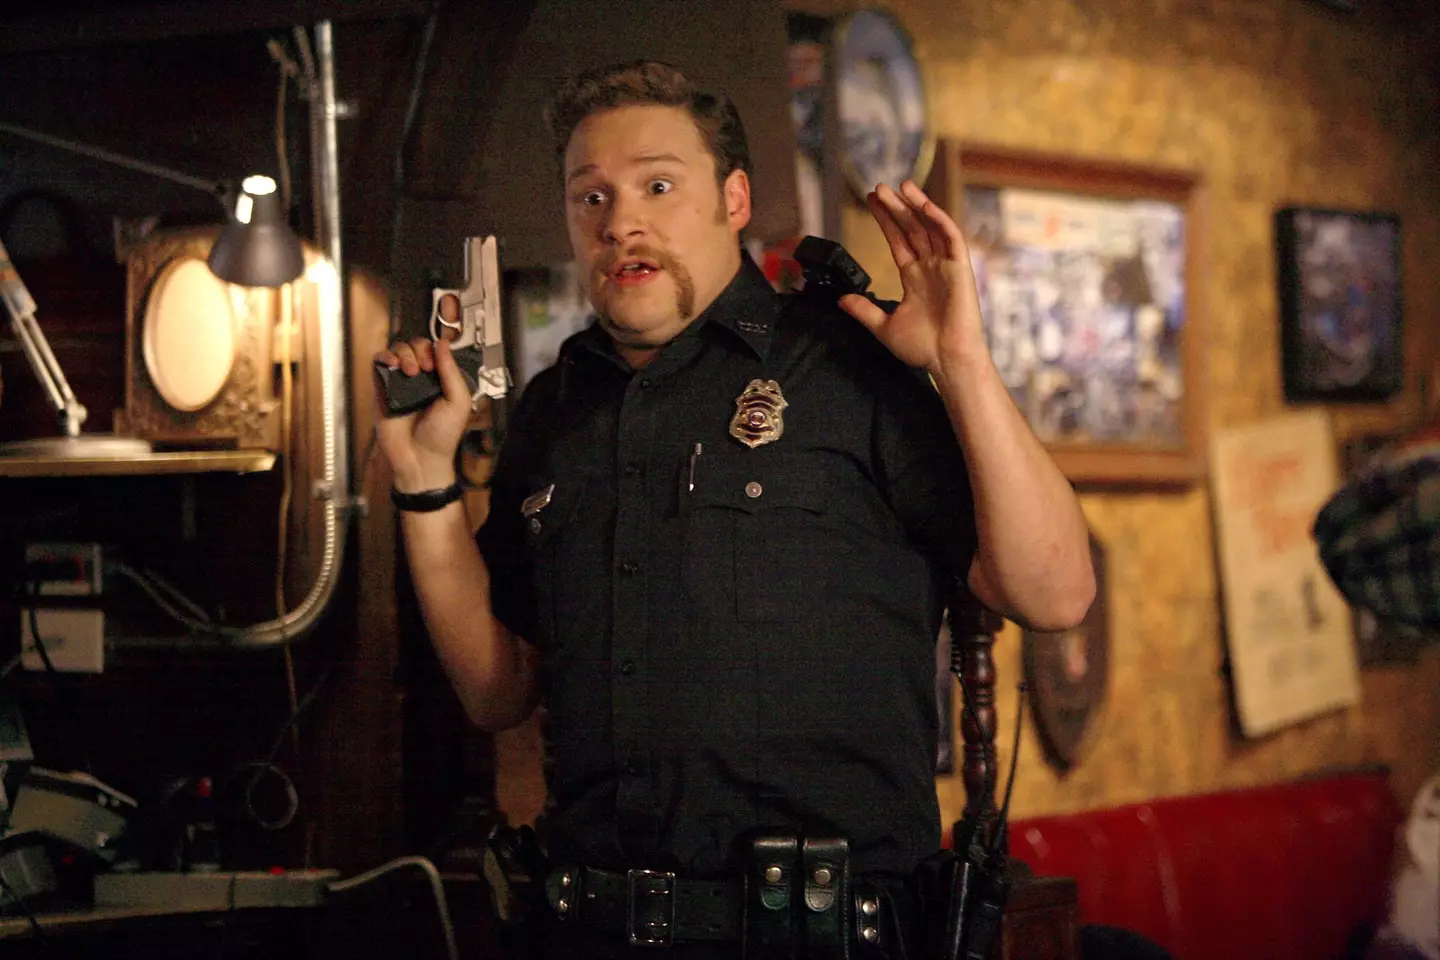 Seth Rogen as Officer Michaels in Superbad, who somehow inspired real people to become real cops.